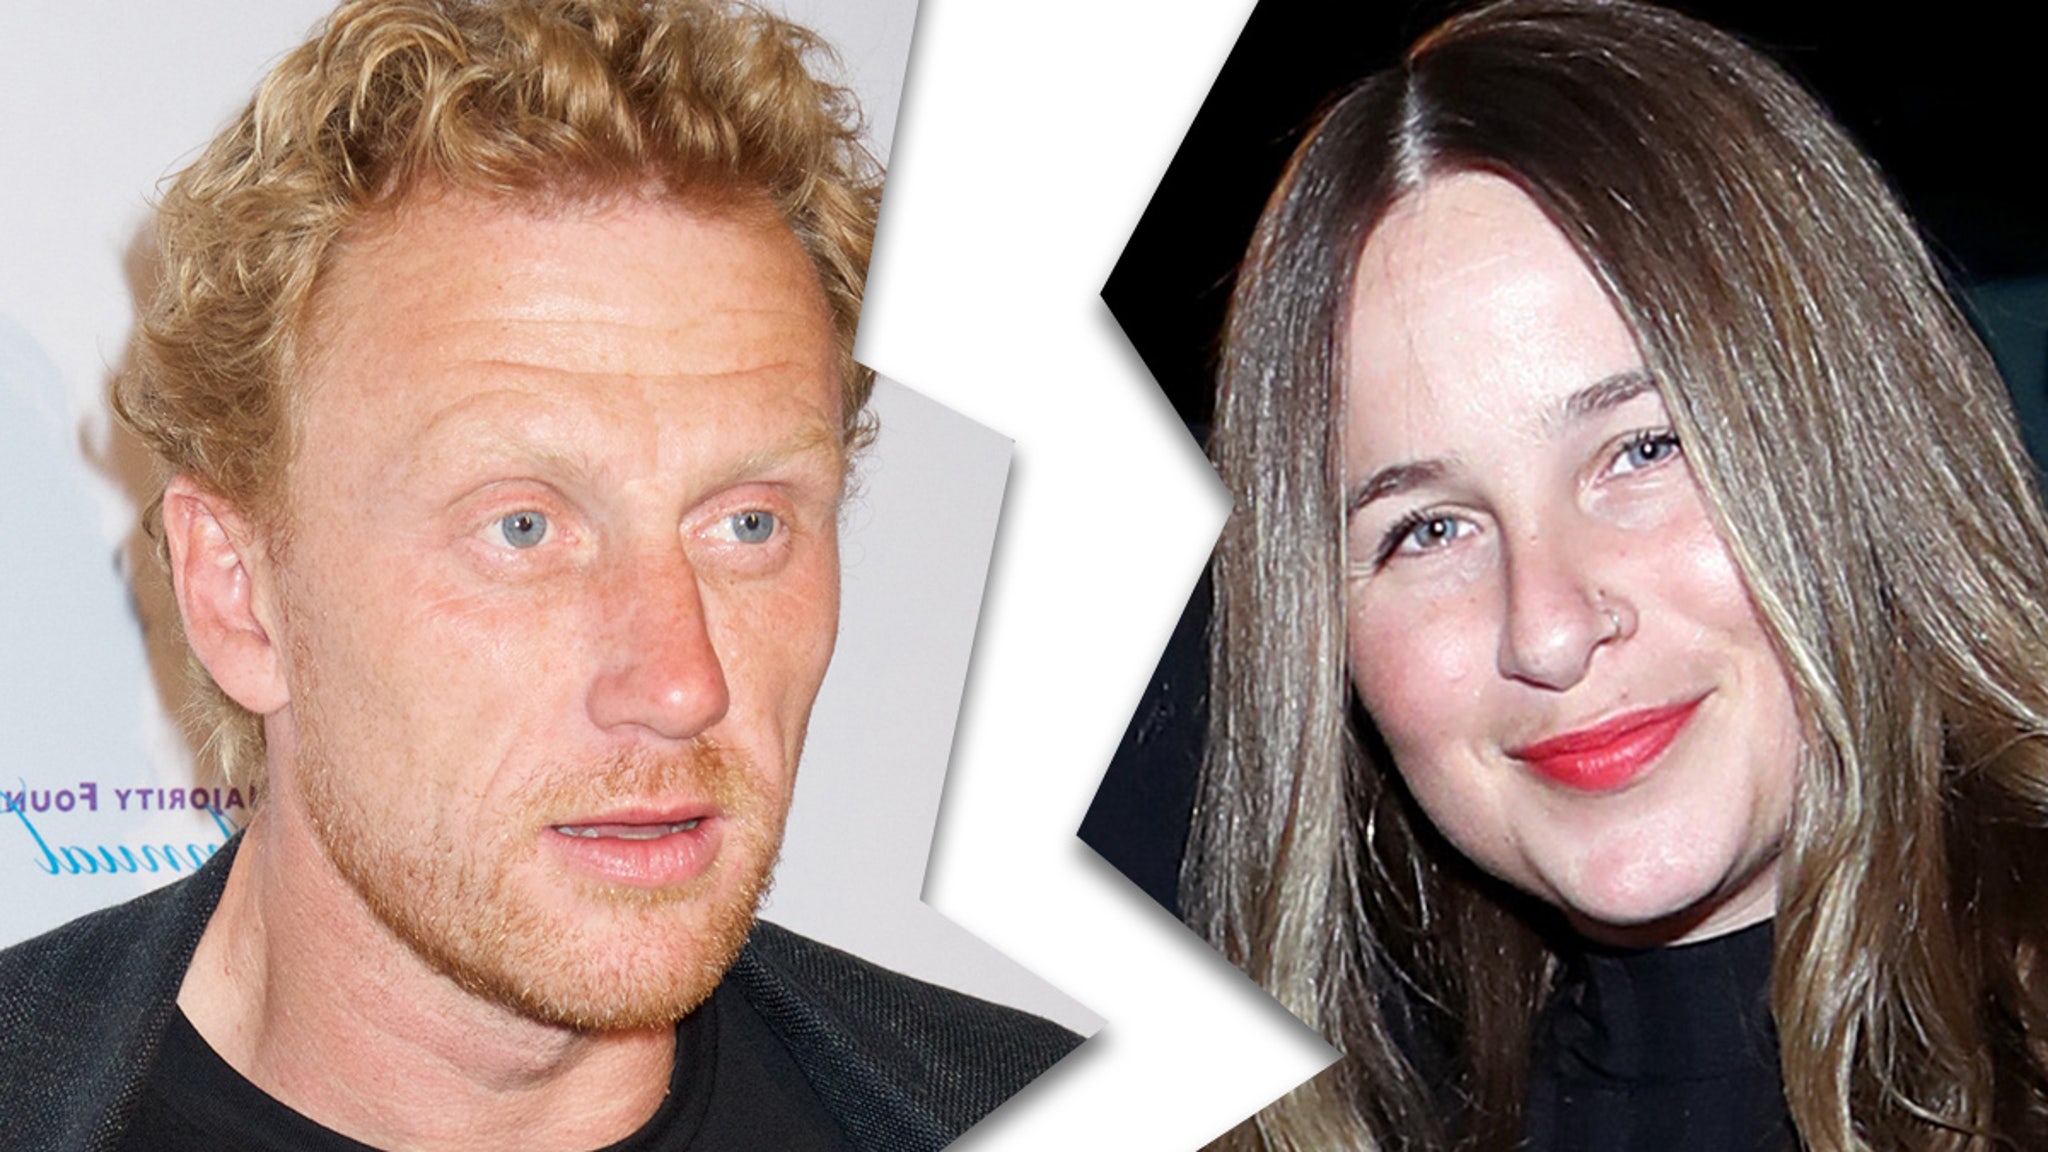 Wife of 'Grey's Anatomy' star Kevin McKidd files for divorce